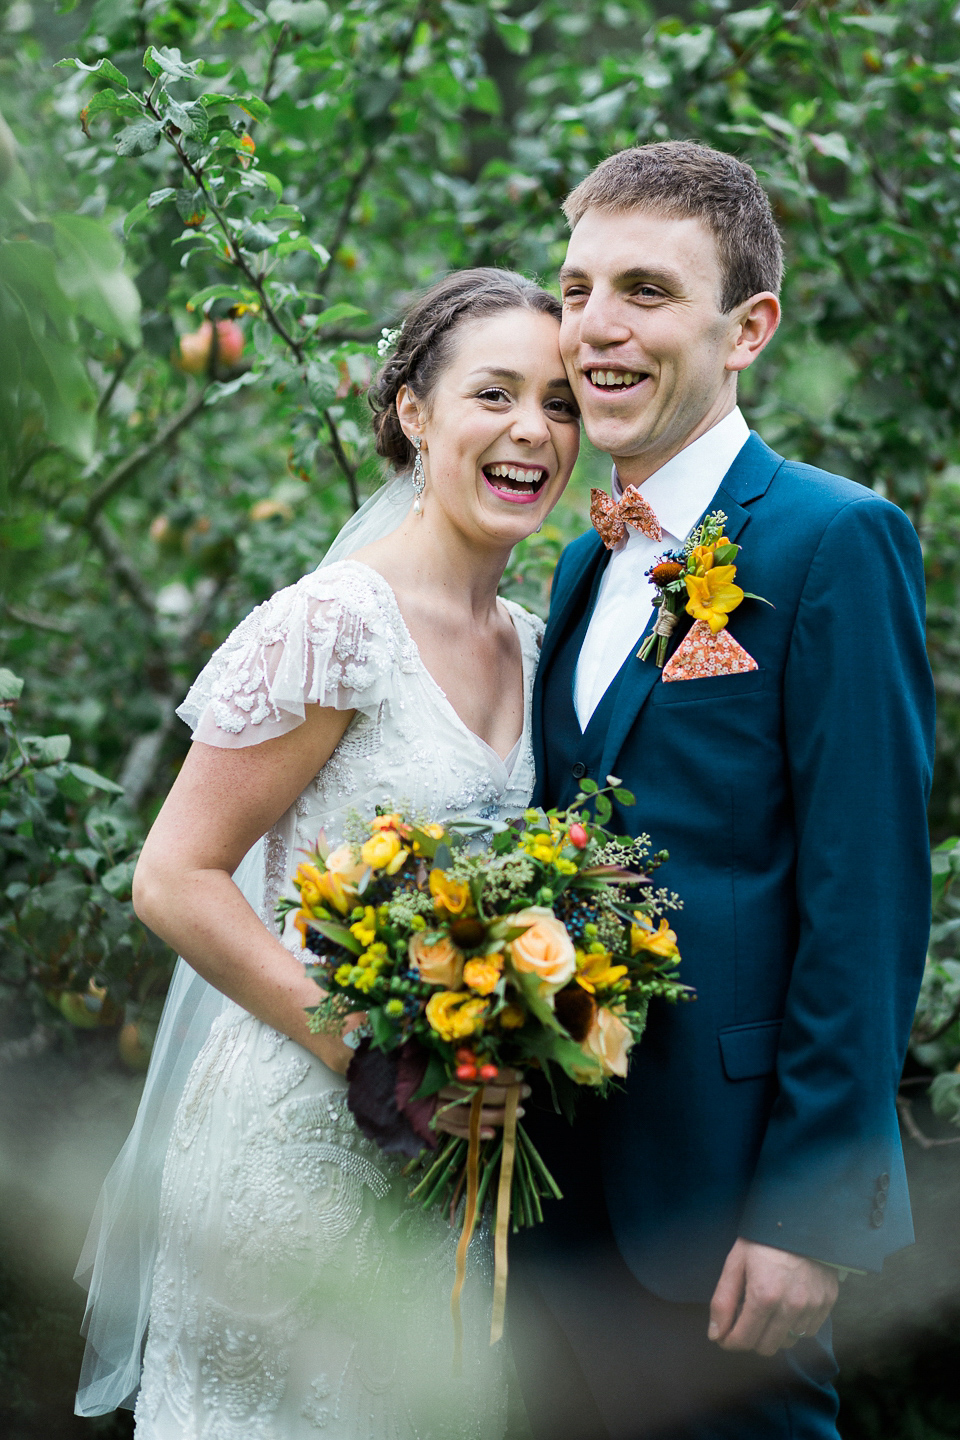 Holly wore an Eliza Jane Howell gown for her colourful, outdoor wedding in Scotland. Images by Solen Photography.